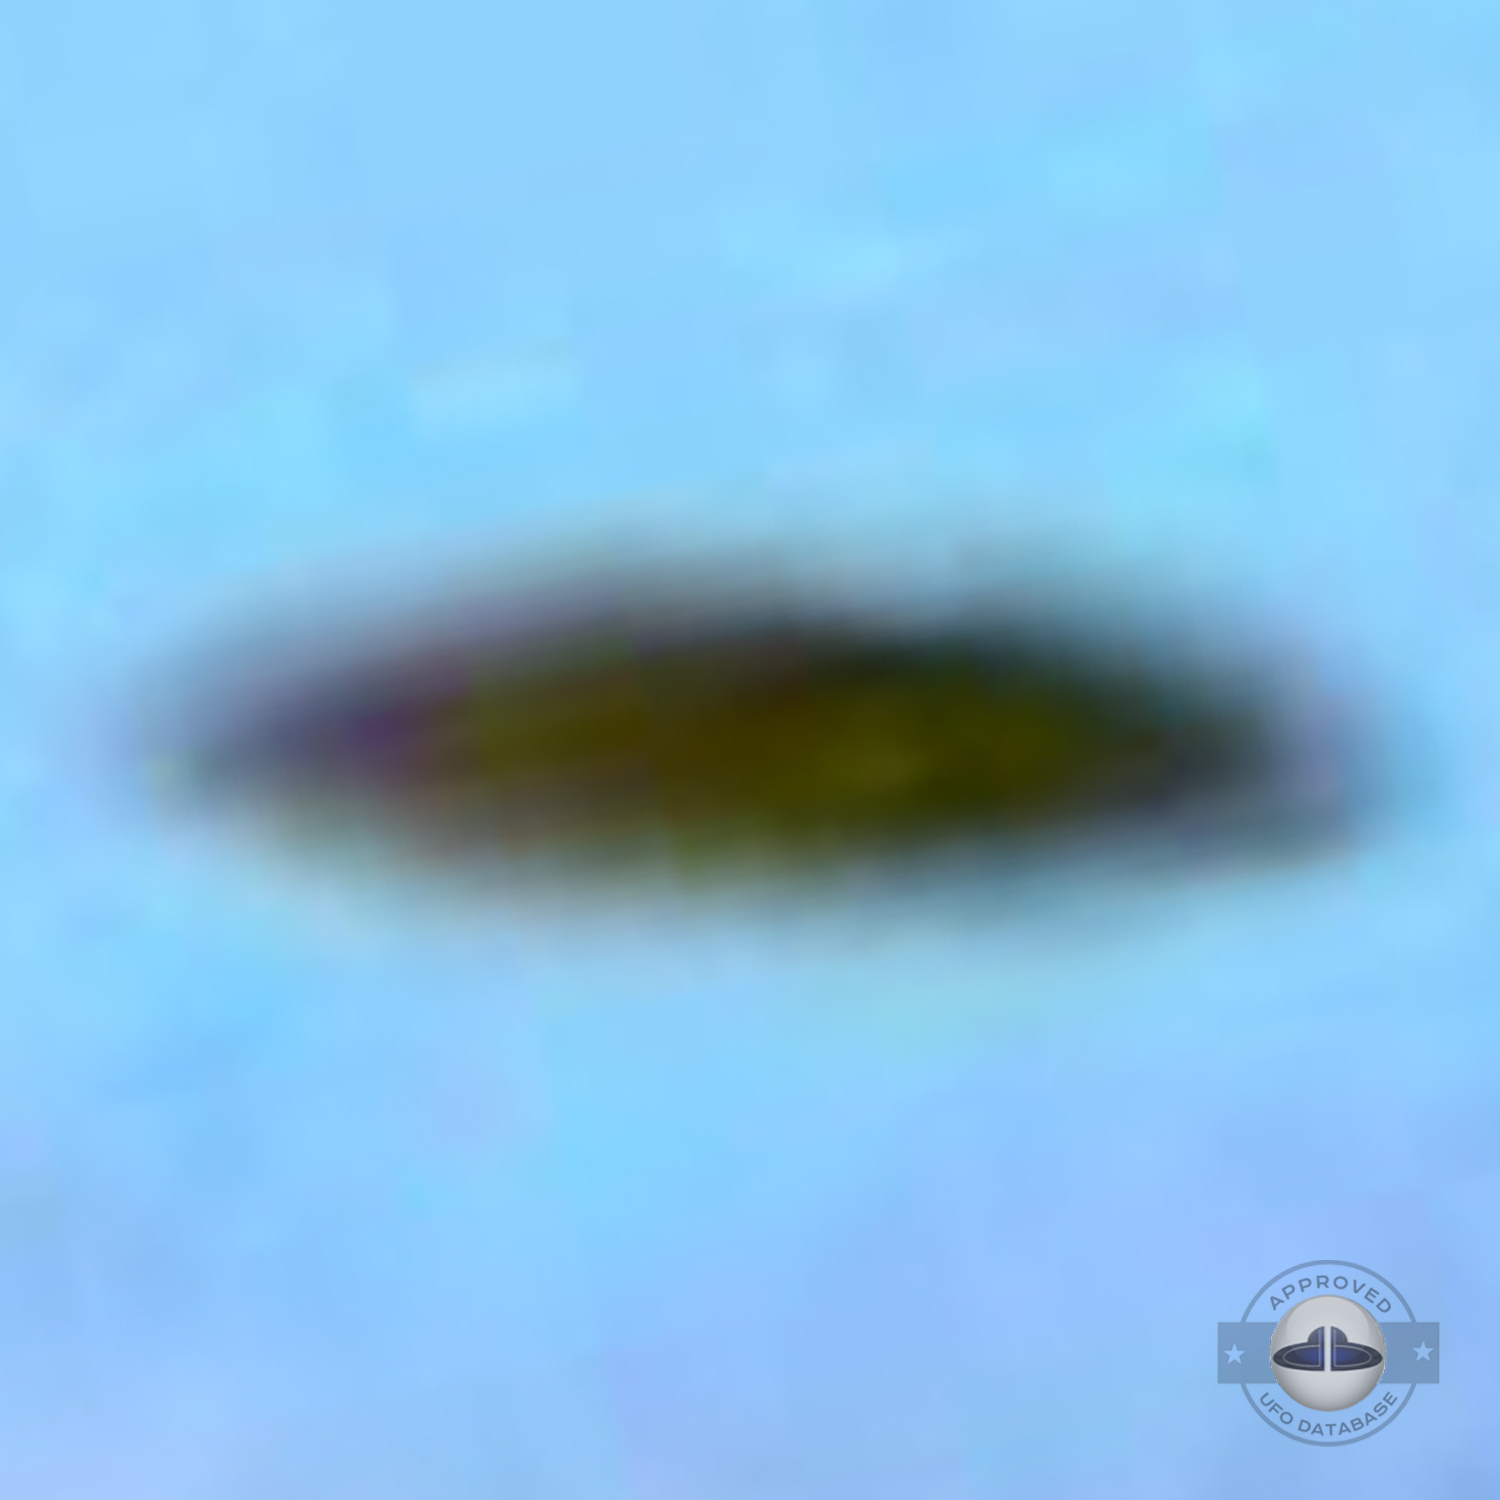 UFO picture taken on october 21, 2004 over the Kaneohe Bay in Hawaii UFO Picture #13-6